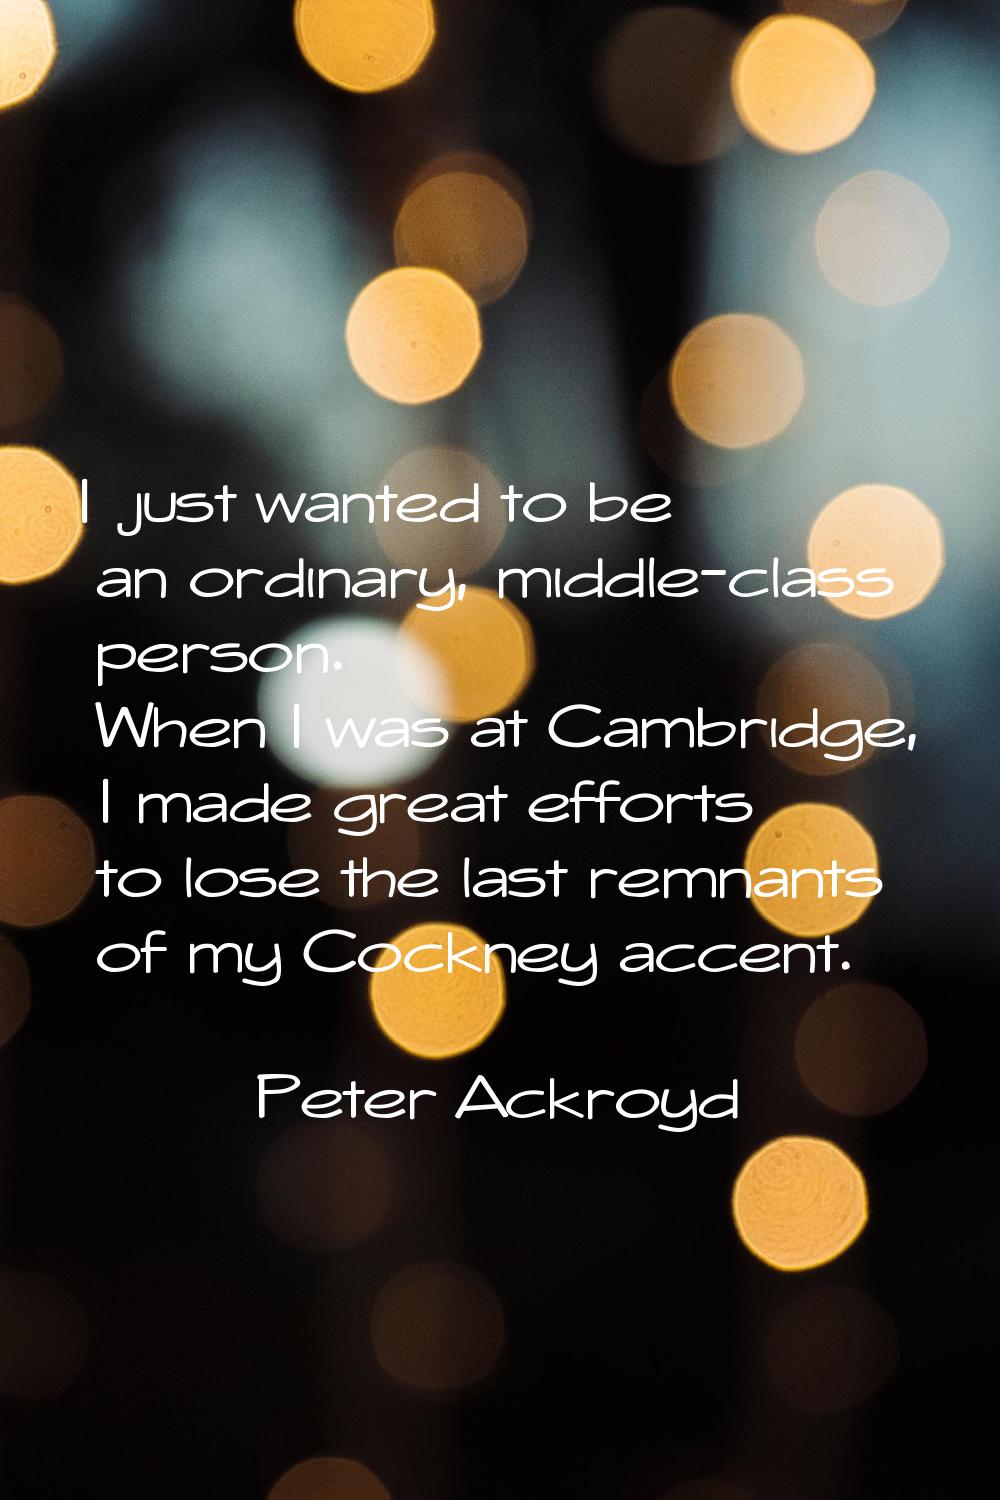 I just wanted to be an ordinary, middle-class person. When I was at Cambridge, I made great efforts